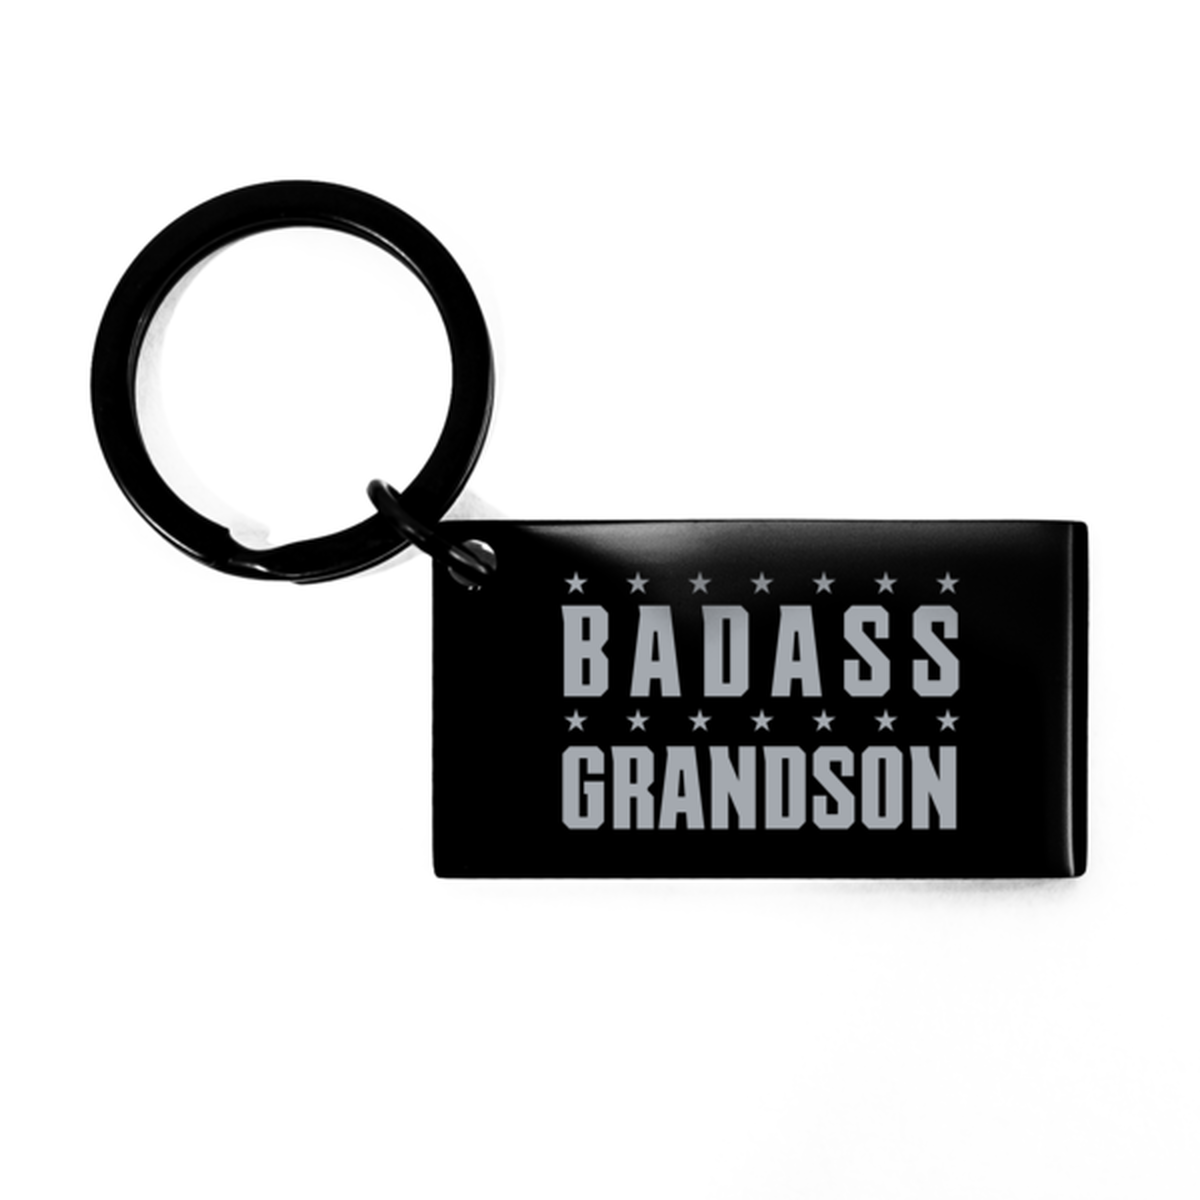 Grandson Black Keychain, Badass Grandson, Funny Family Gifts  Keyring For Grandson From Grandfather Grandmother